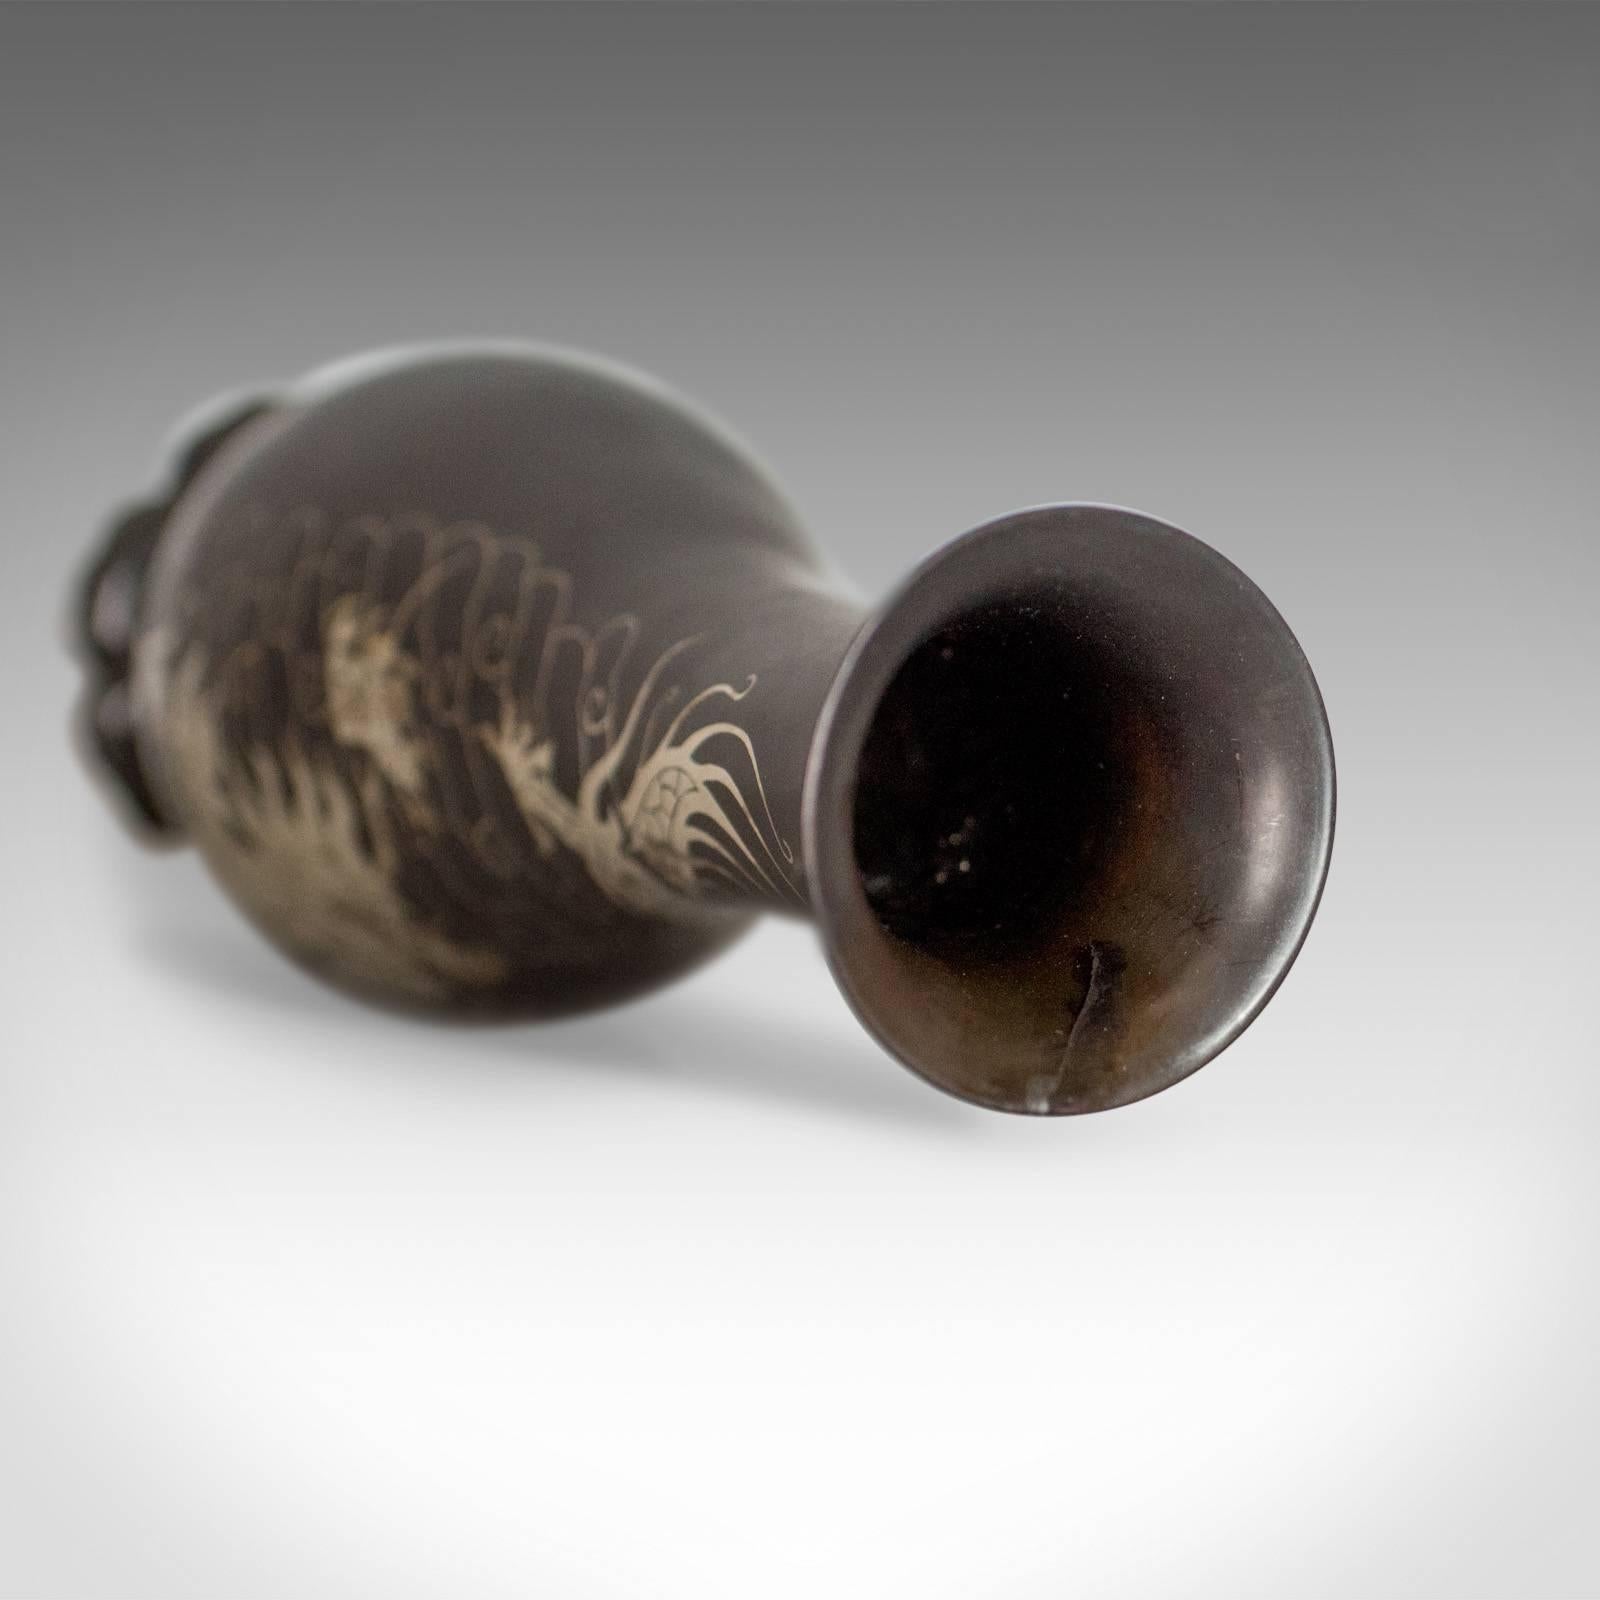 20th Century Vintage Pair of Lacquerware Vases, Chinese, 'Bodiless', Stem, Silver on Black